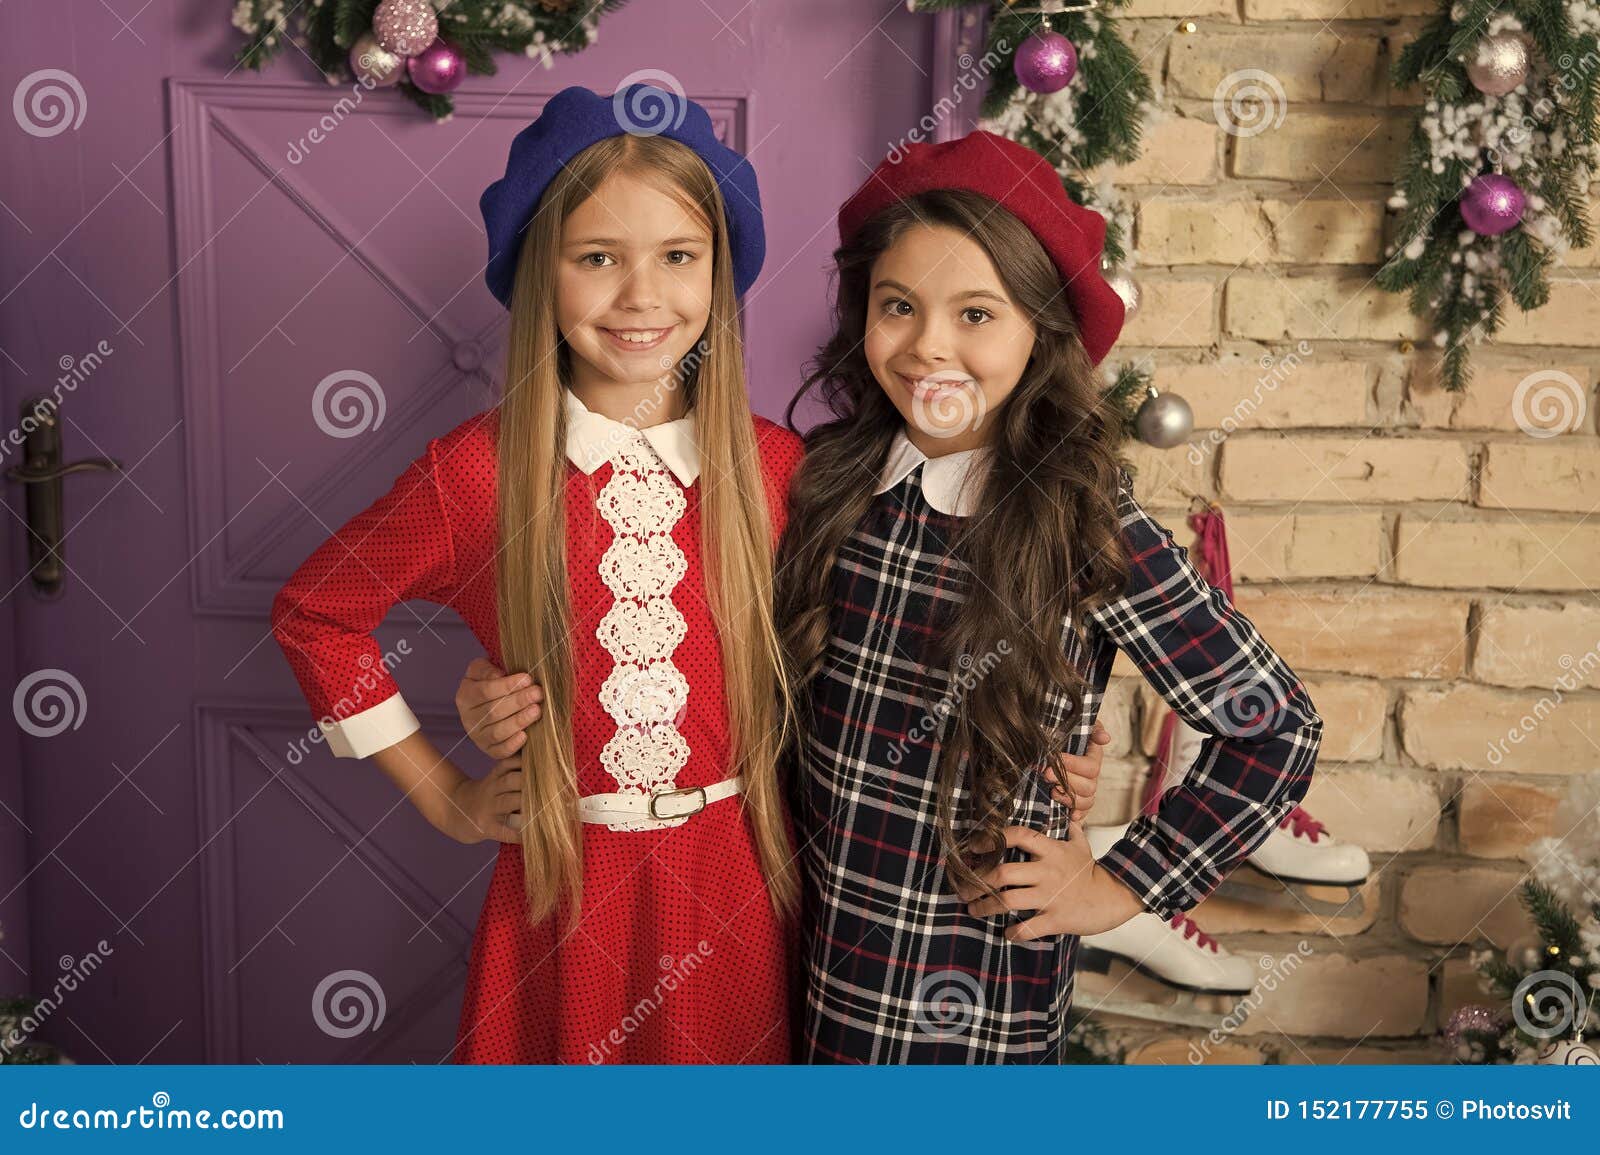 Dressing Like a French Girl. Small Girls with Long Hair Style for New Year  Party Stock Image - Image of style, xmass: 152177755